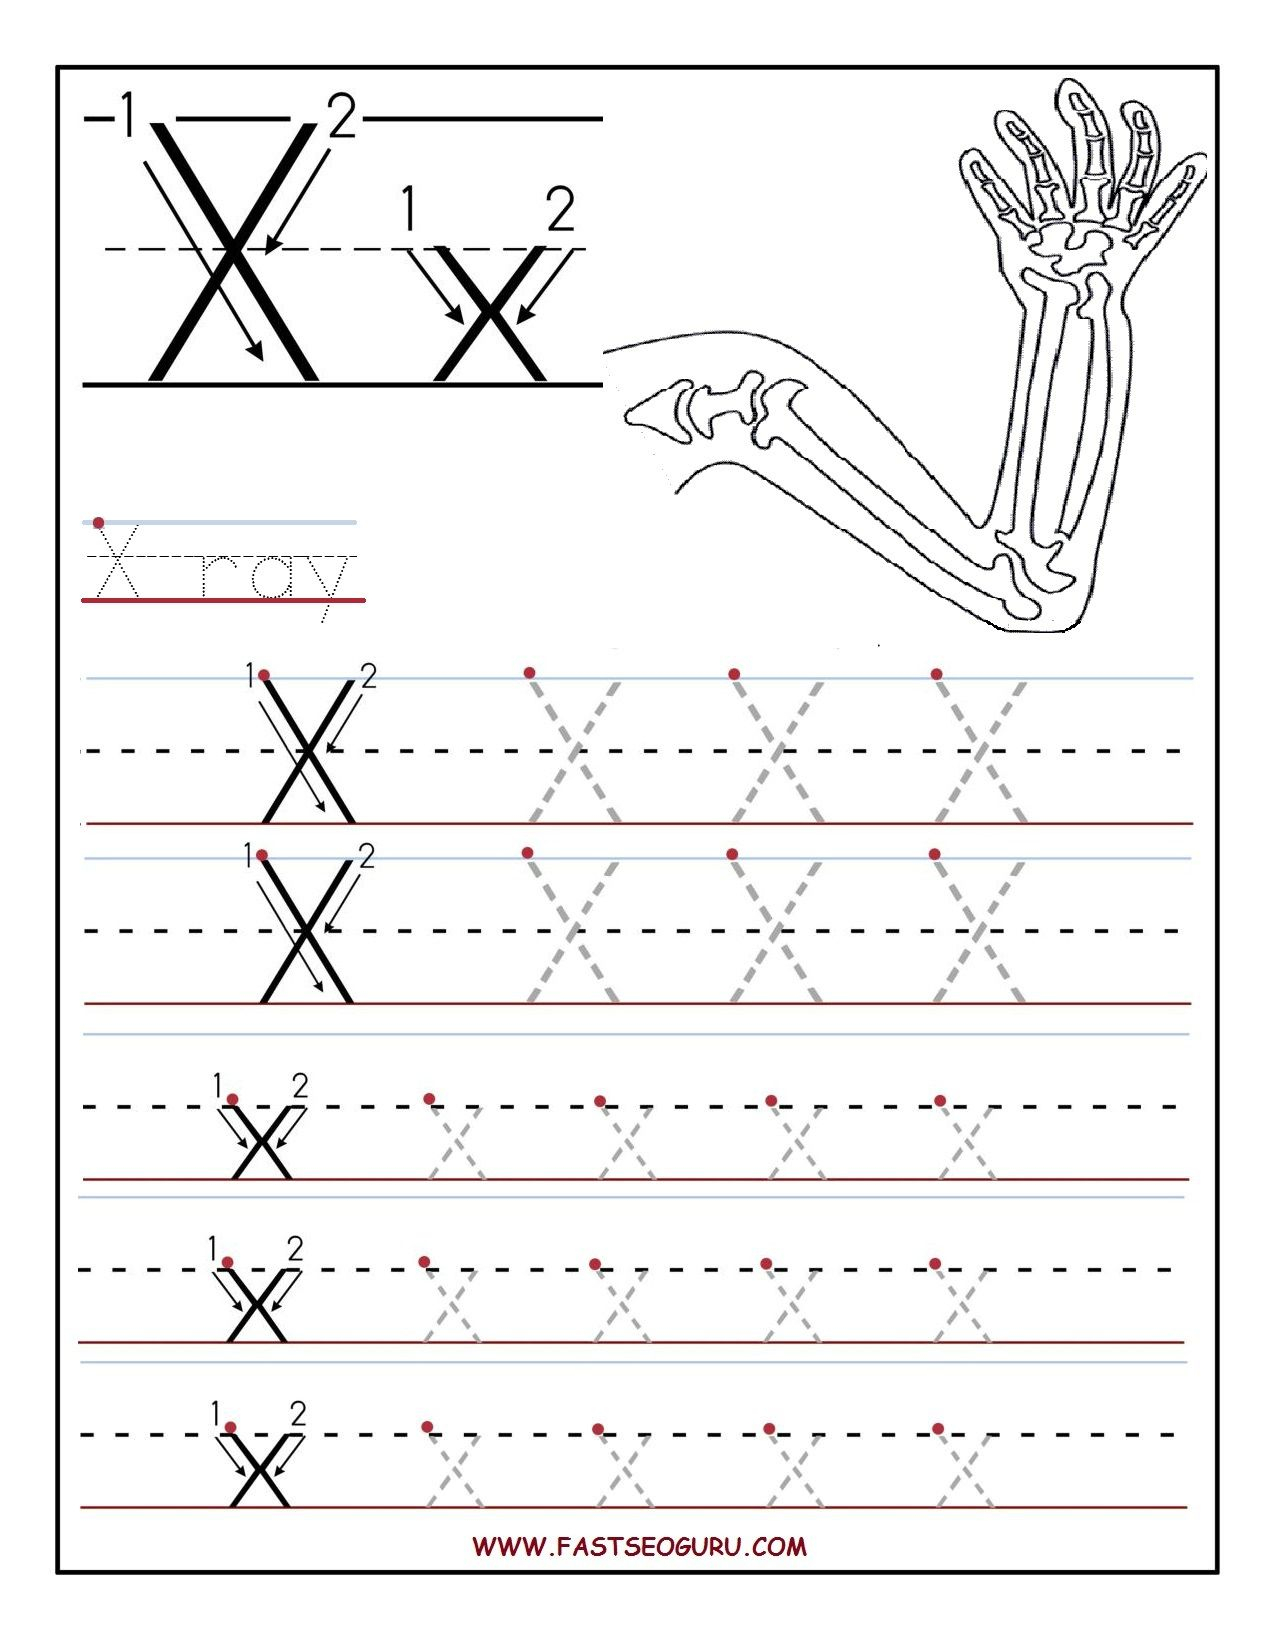 Printable Letter X Tracing Worksheets For Preschool in Tracing Letter X Preschool